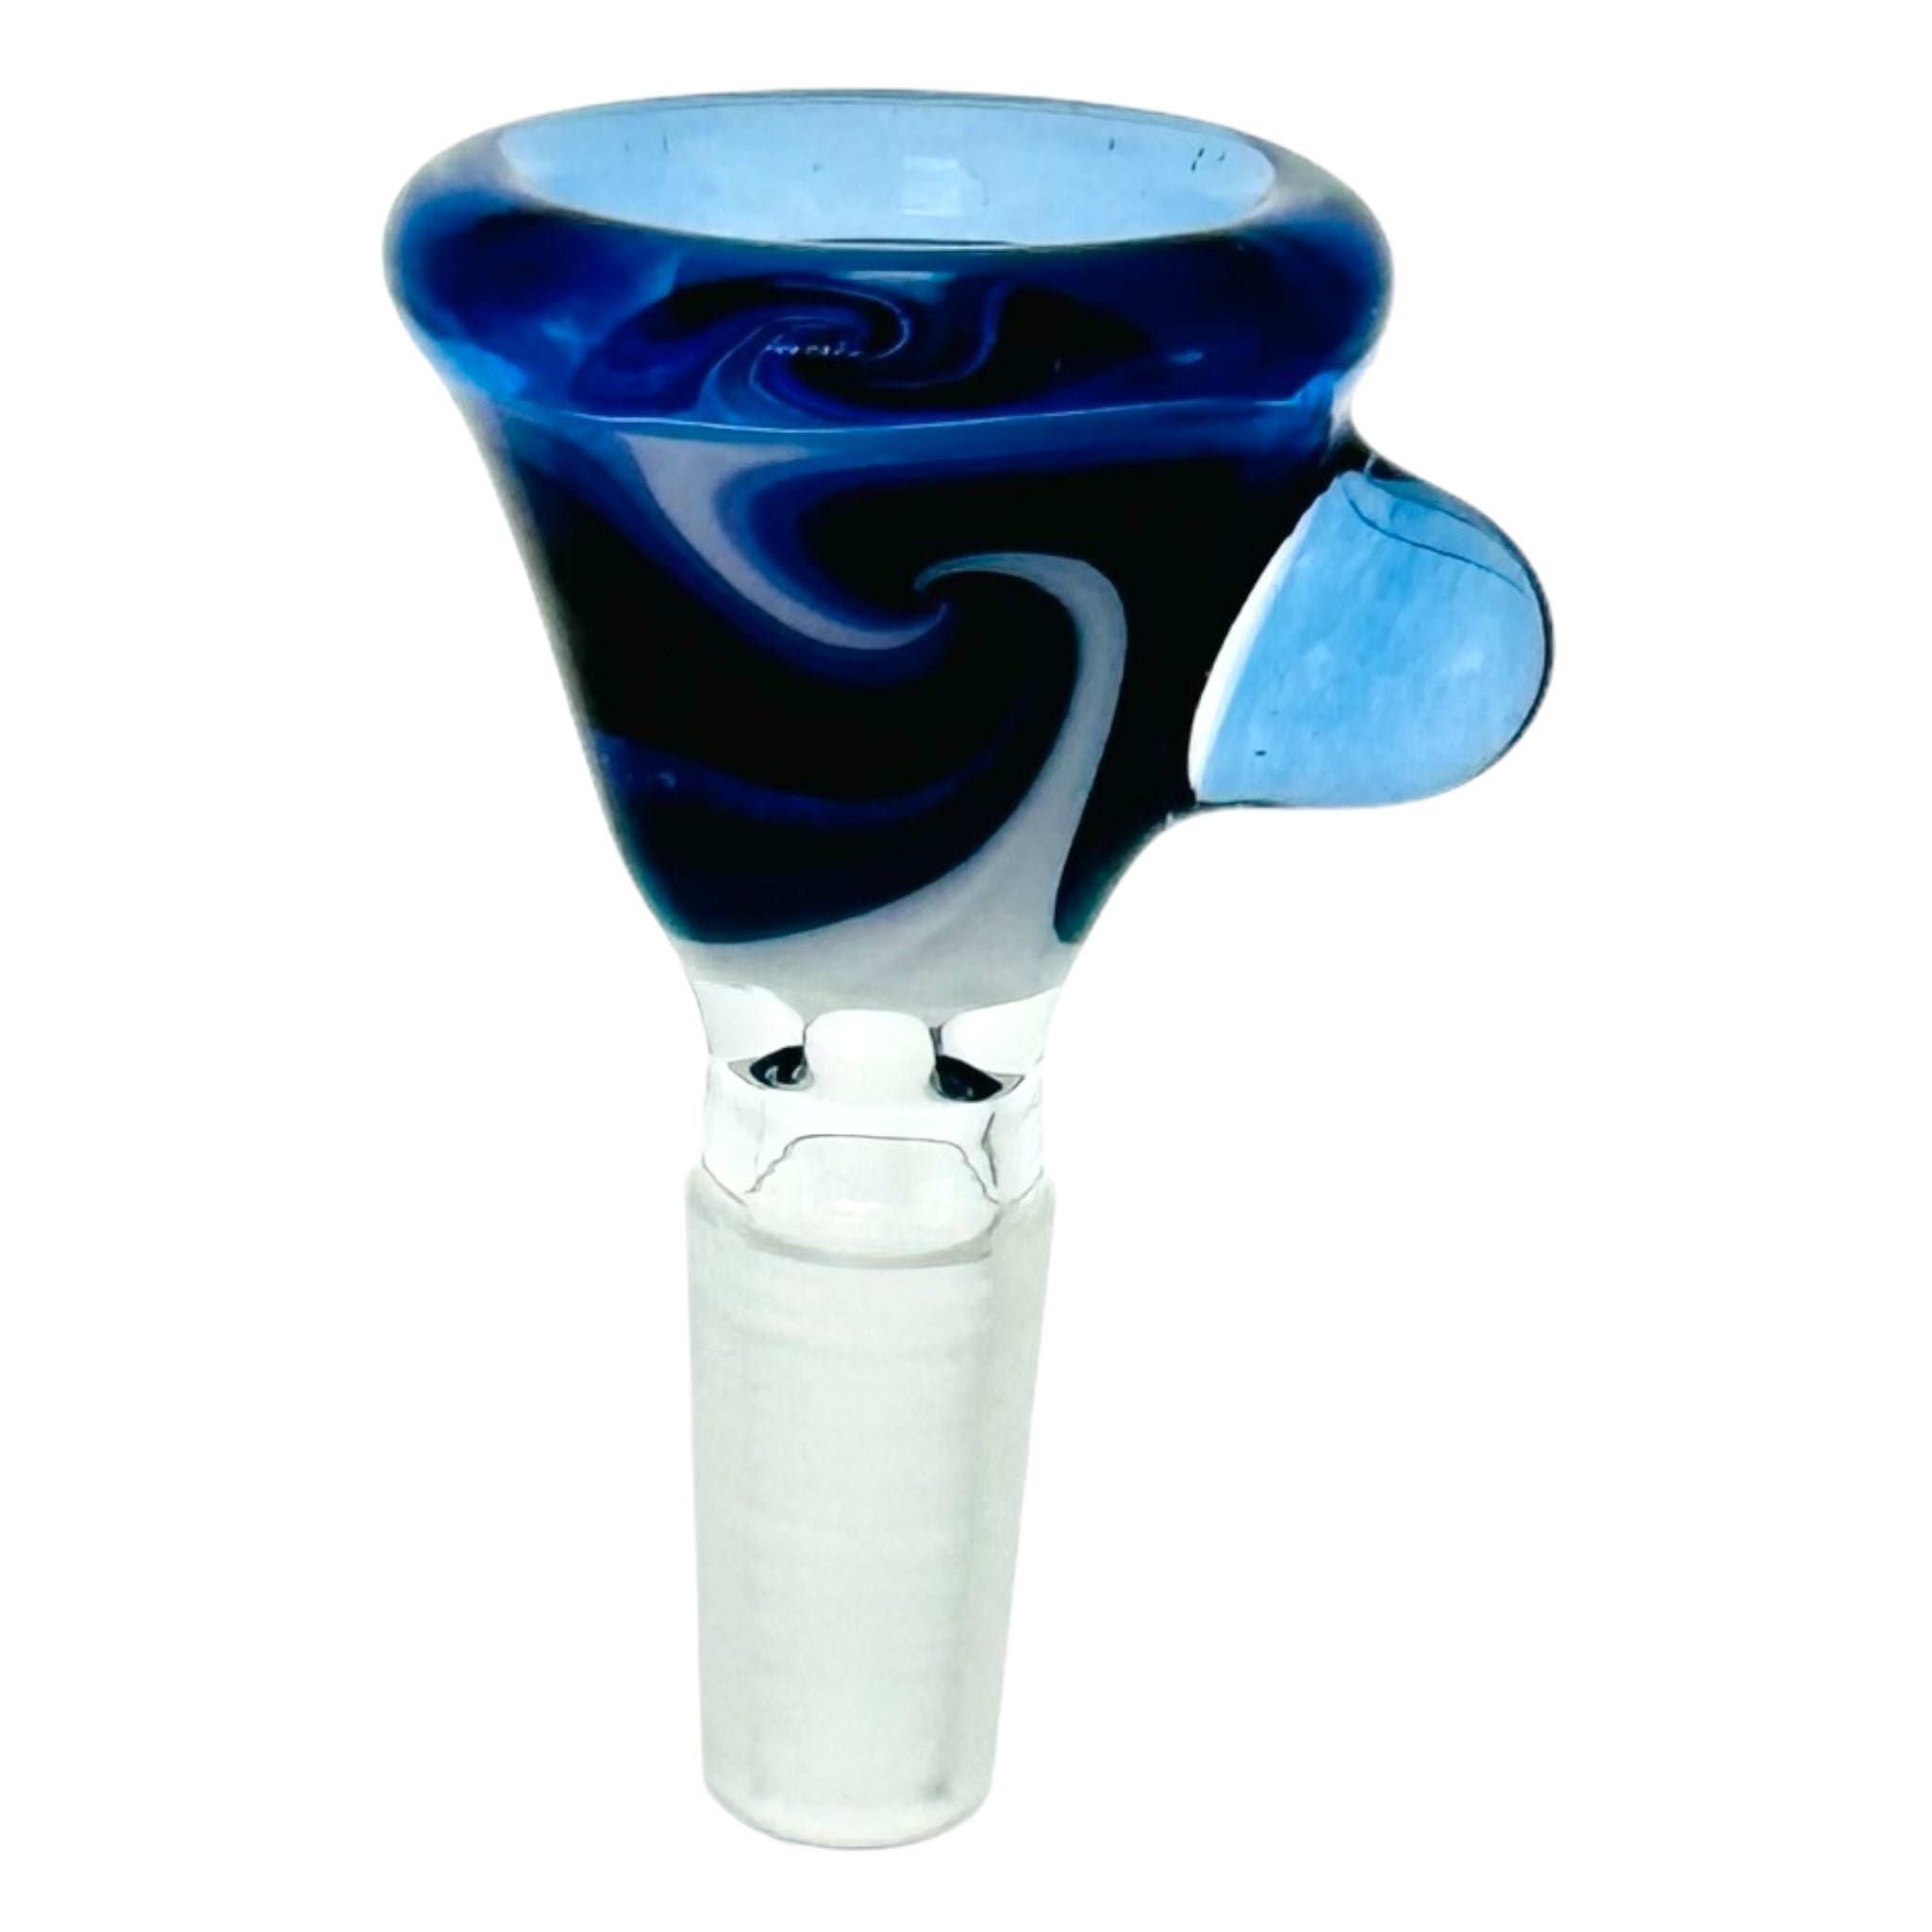 N3RD Glass 10mm Flower Bowl Black And Blue Ice With Blue